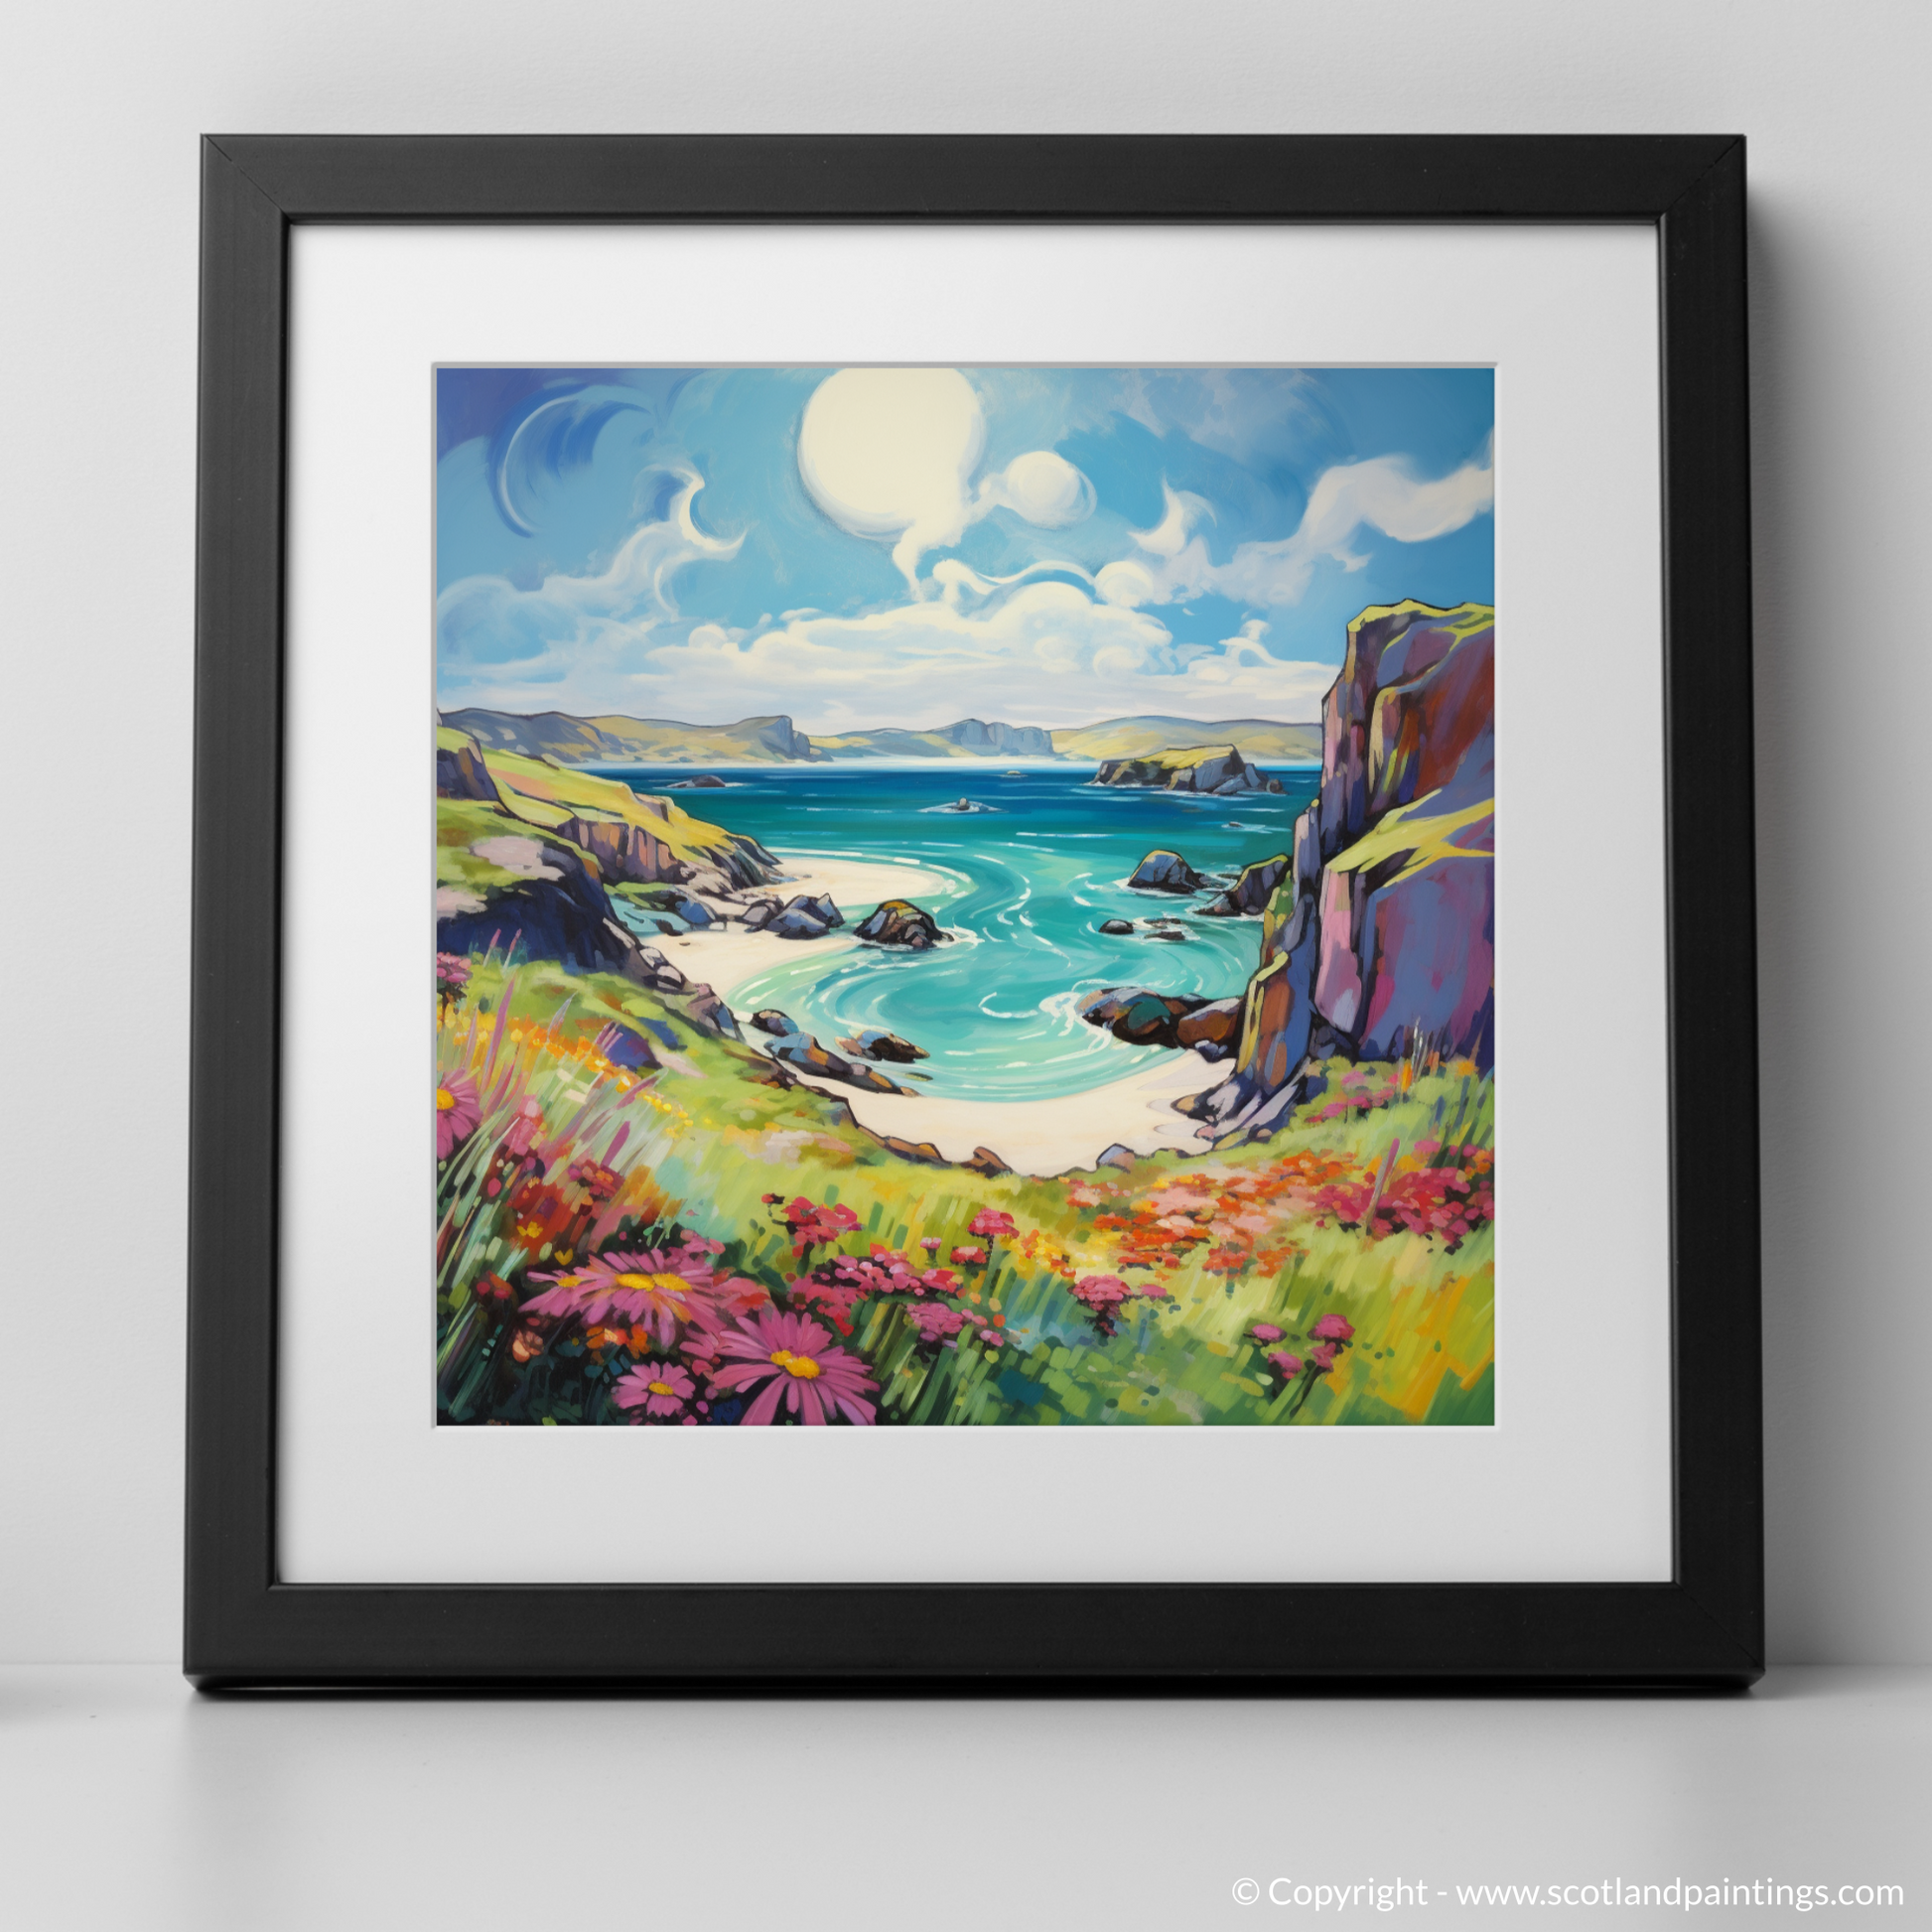 Art Print of Isle of Lewis, Outer Hebrides in summer with a black frame